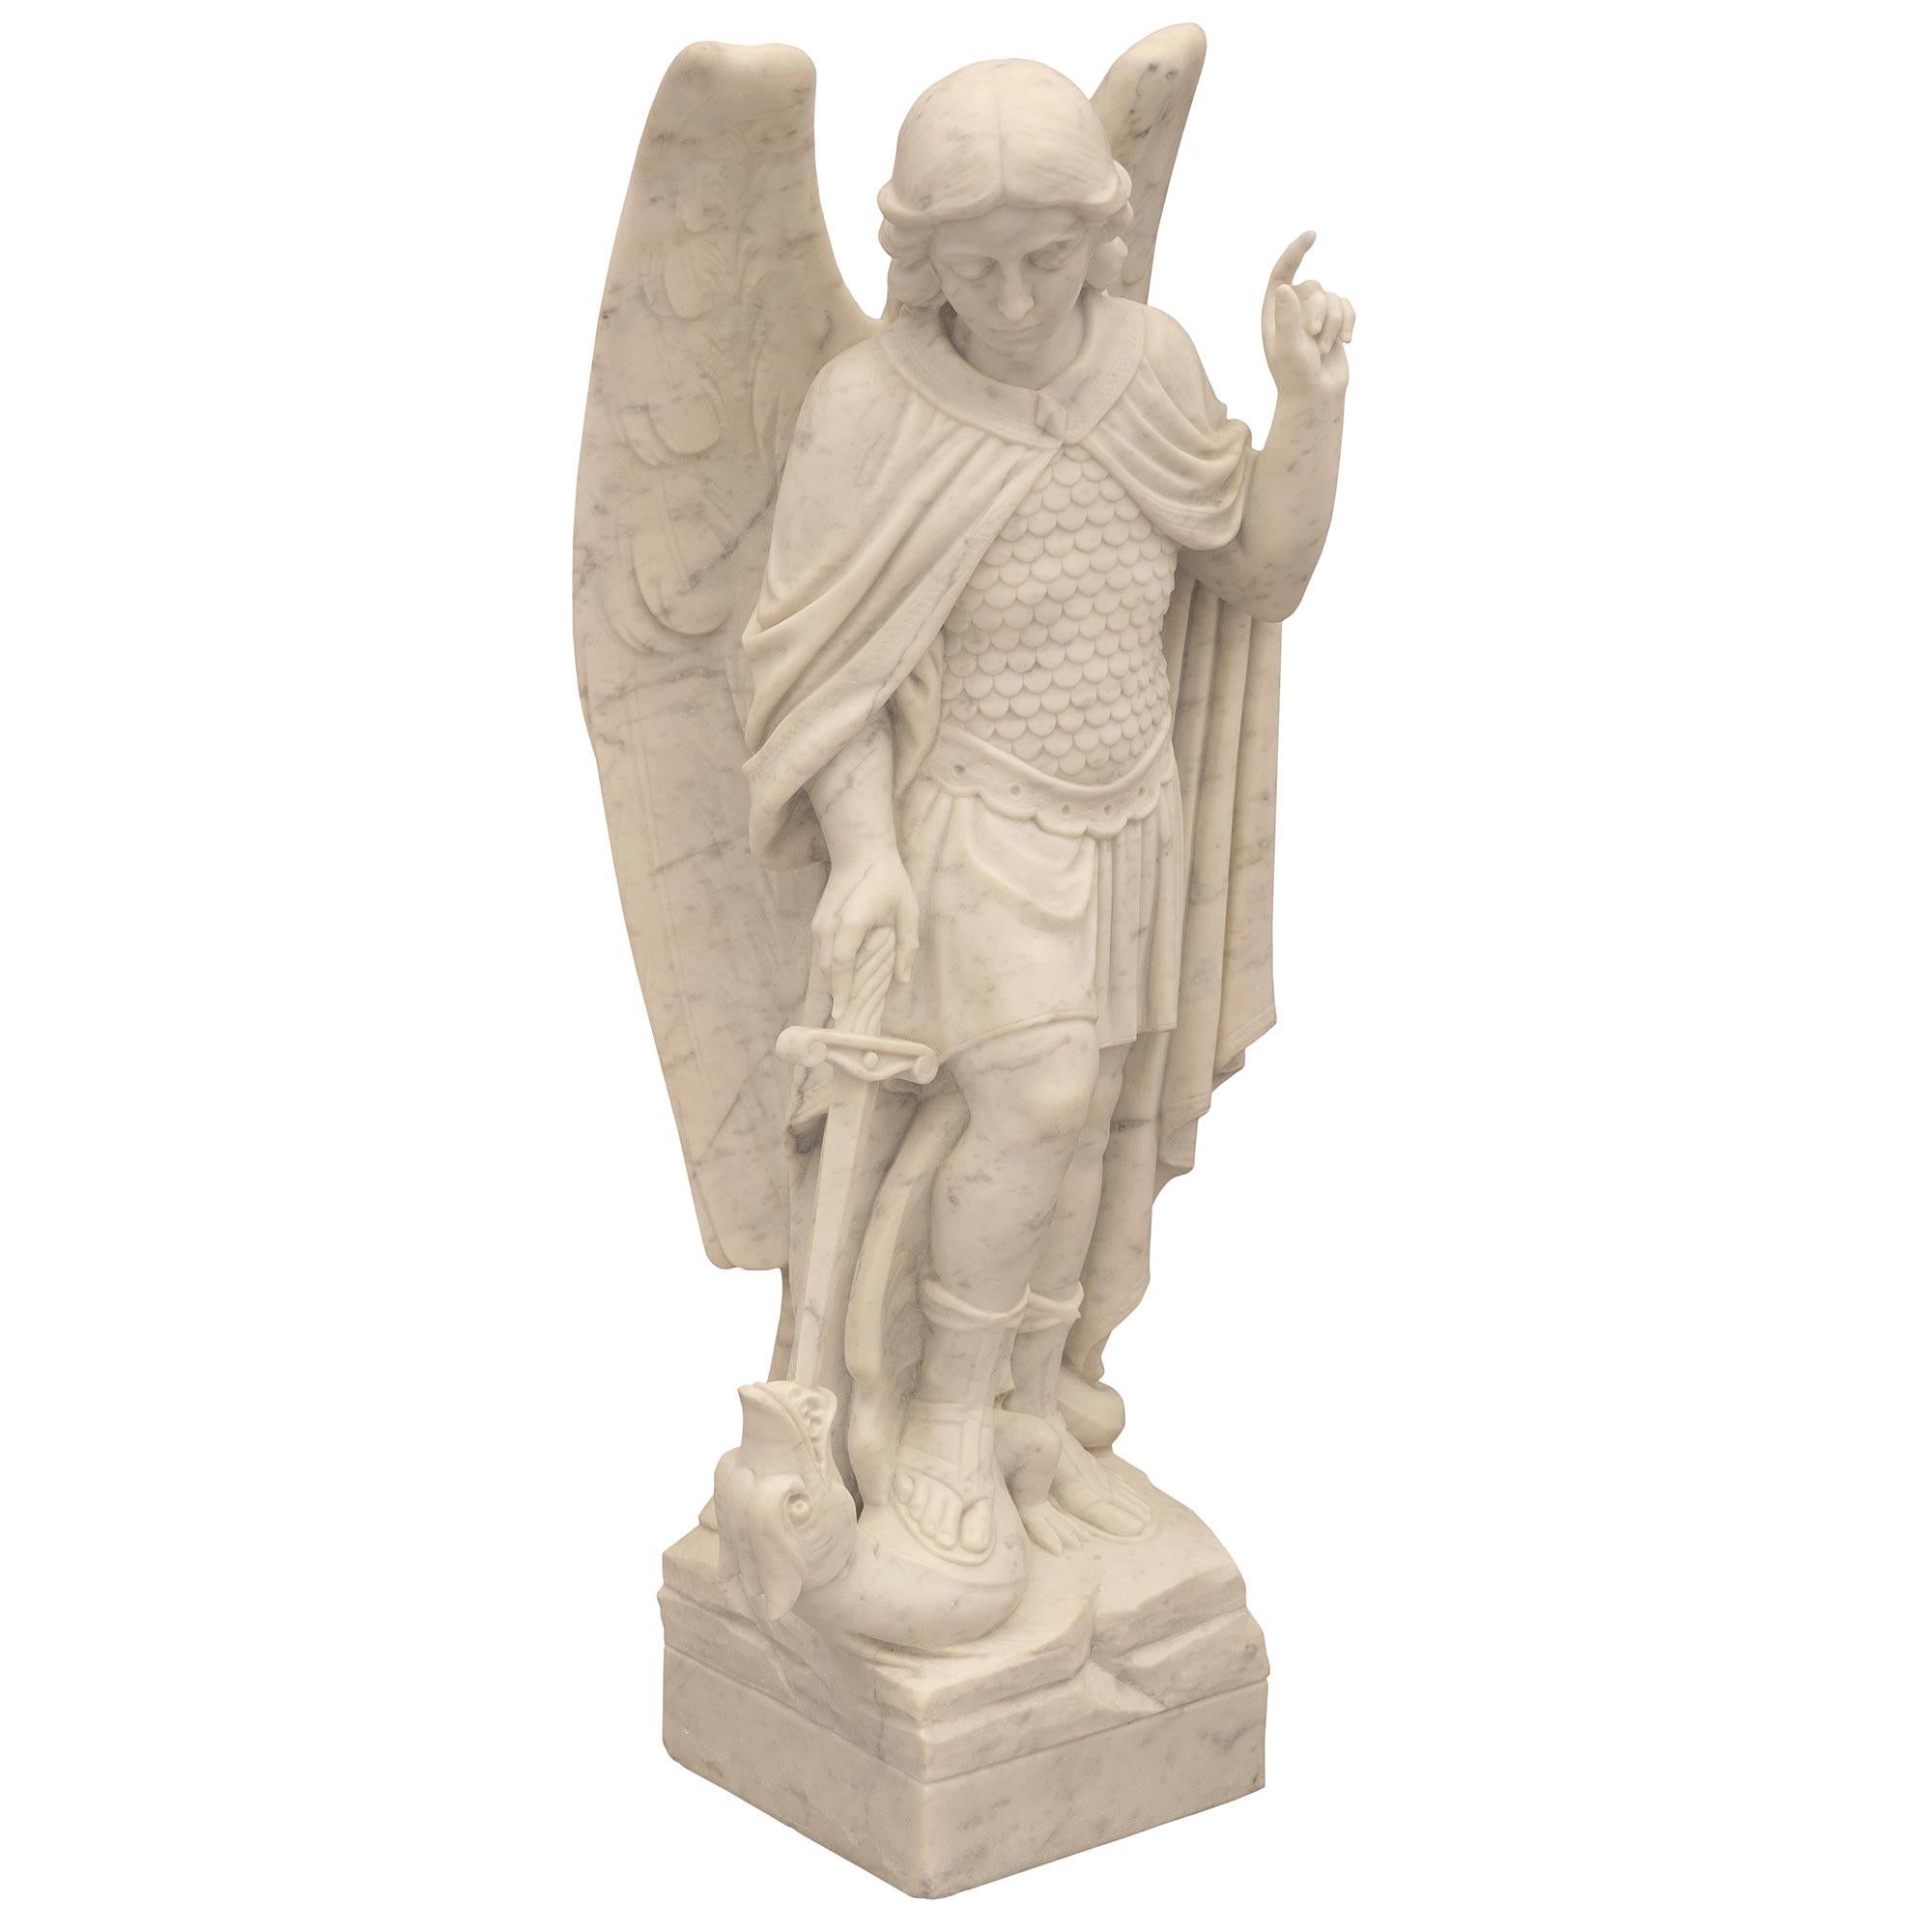 A stunning and very high quality Italian 19th century white Carrara marble statue of Saint Michael slaying the dragon. The statue is raised by a square base with a fine ground like design. Above is the striking and wonderfully executed Saint Michael